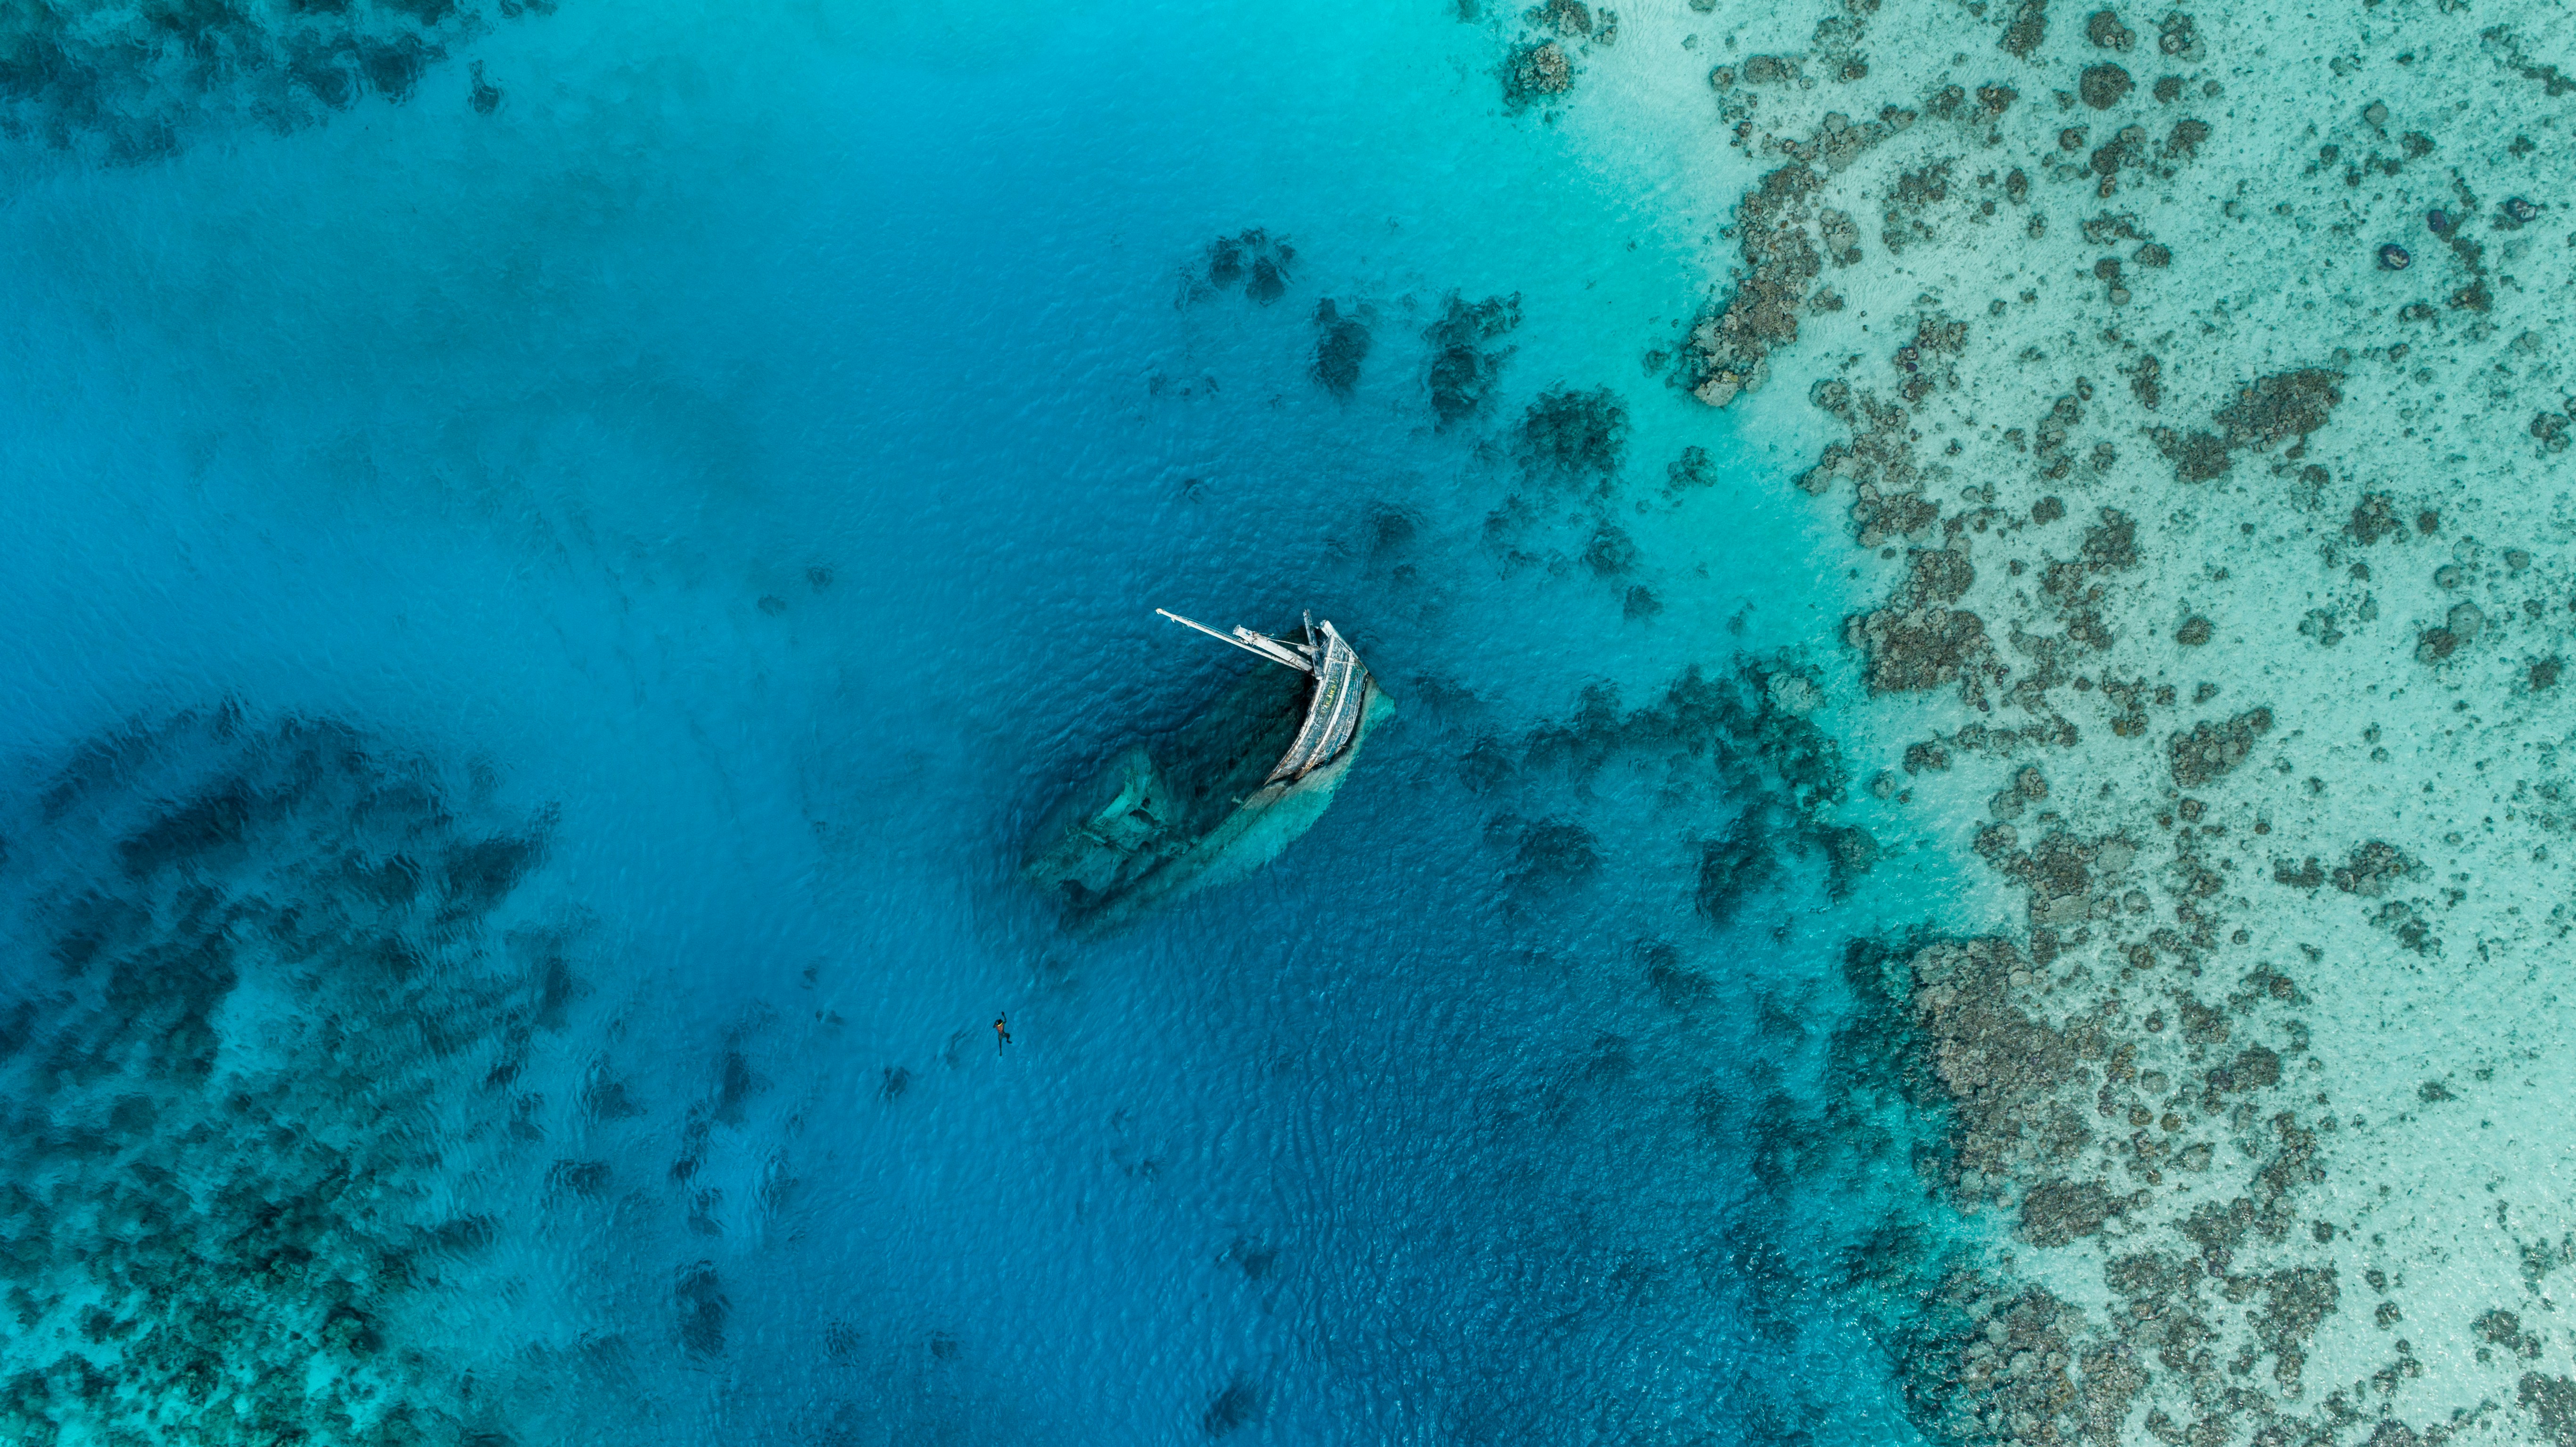 This is so far one of the best sight I saw in my life. The wreck is located in Vaavu atoll Maldives. I was creating some content for a hotel near by and they showed me this.. Instagram.com/seefromthesky